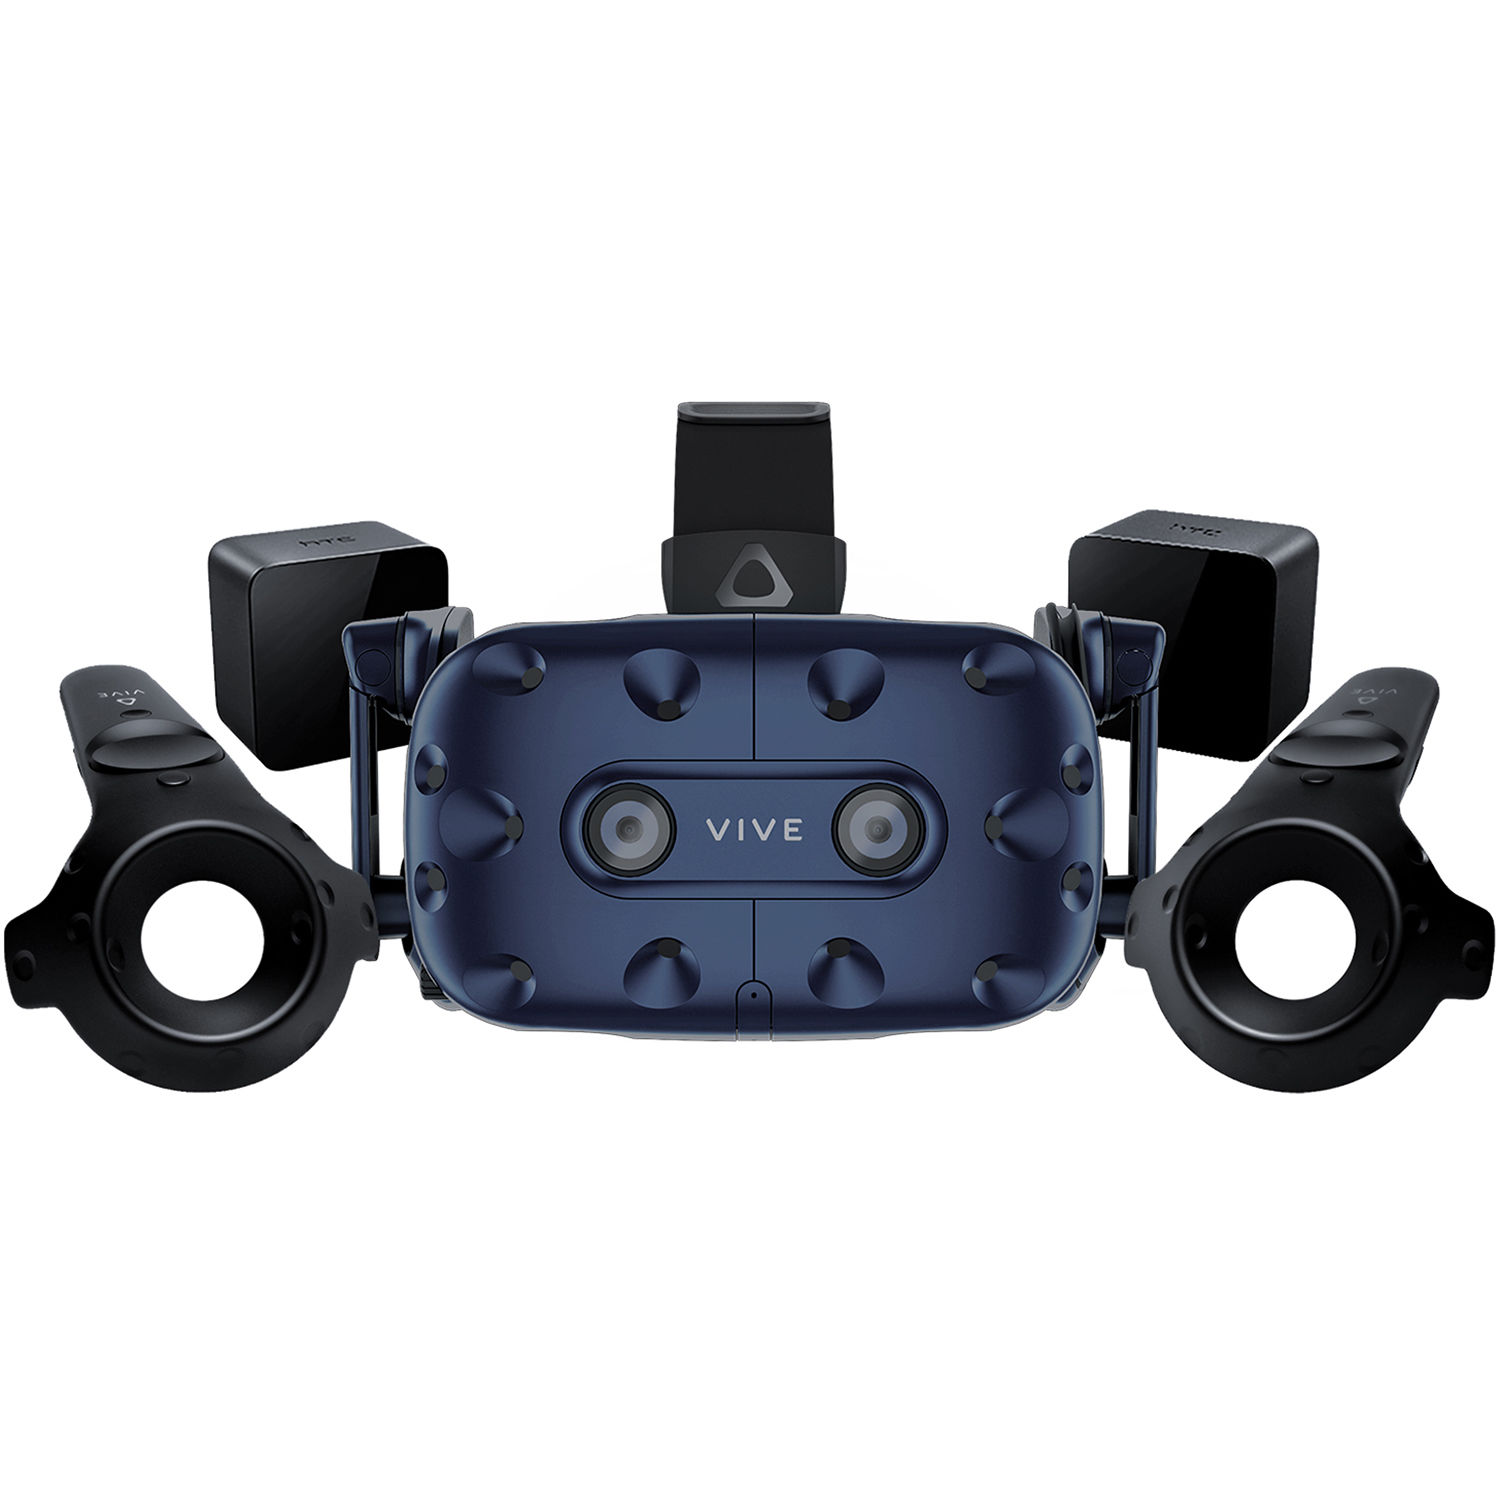 vr headset that can play beat saber